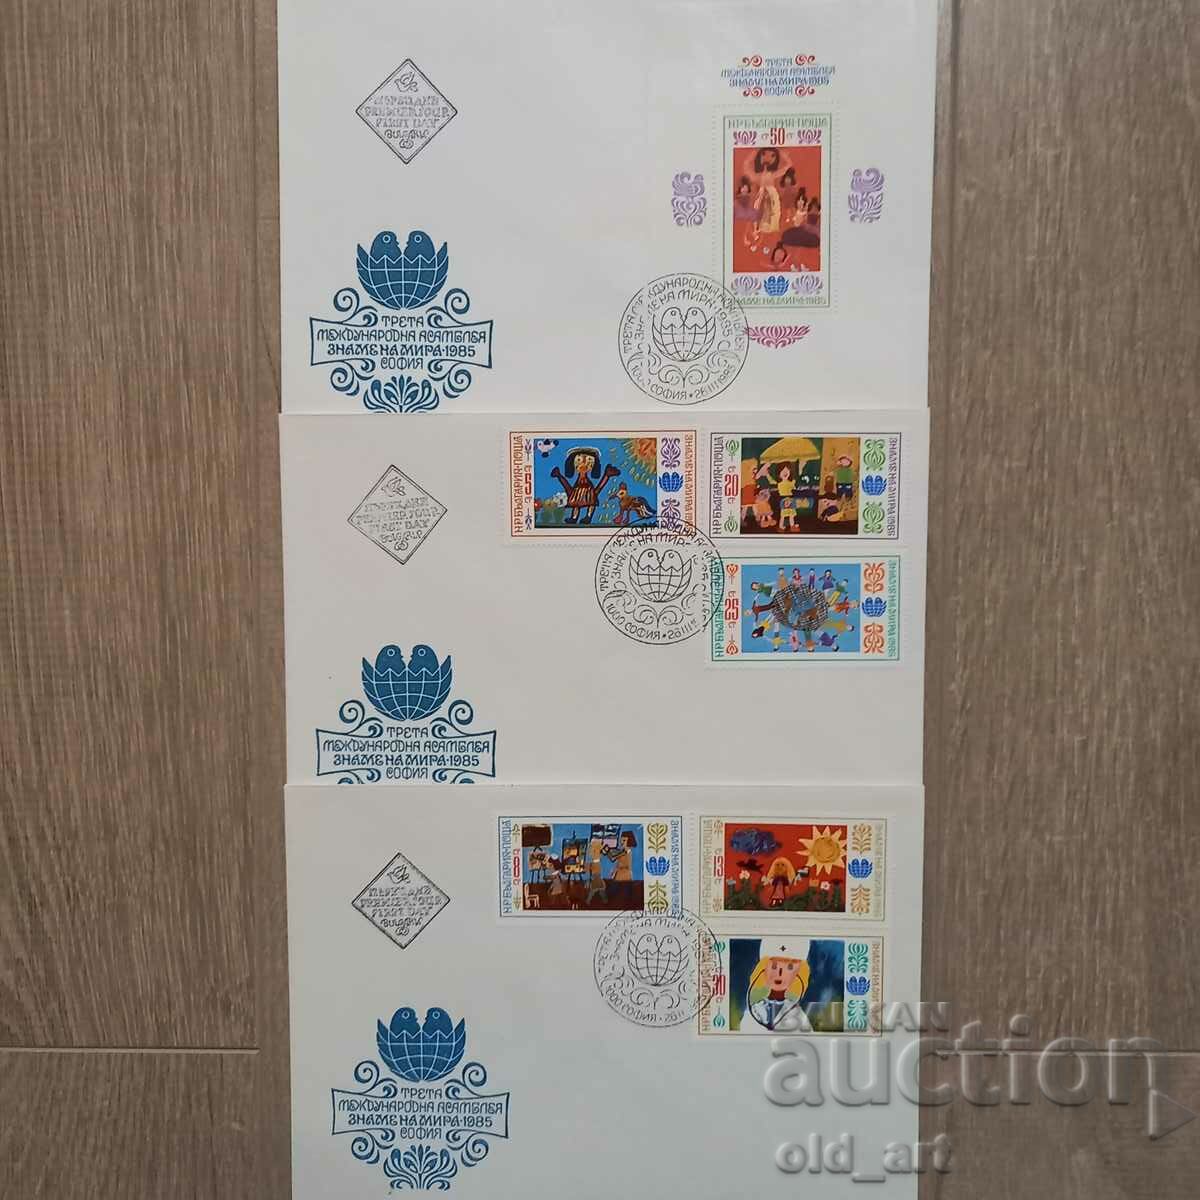 Mailing envelopes - 3 pieces, III International Peace Flag Assembly